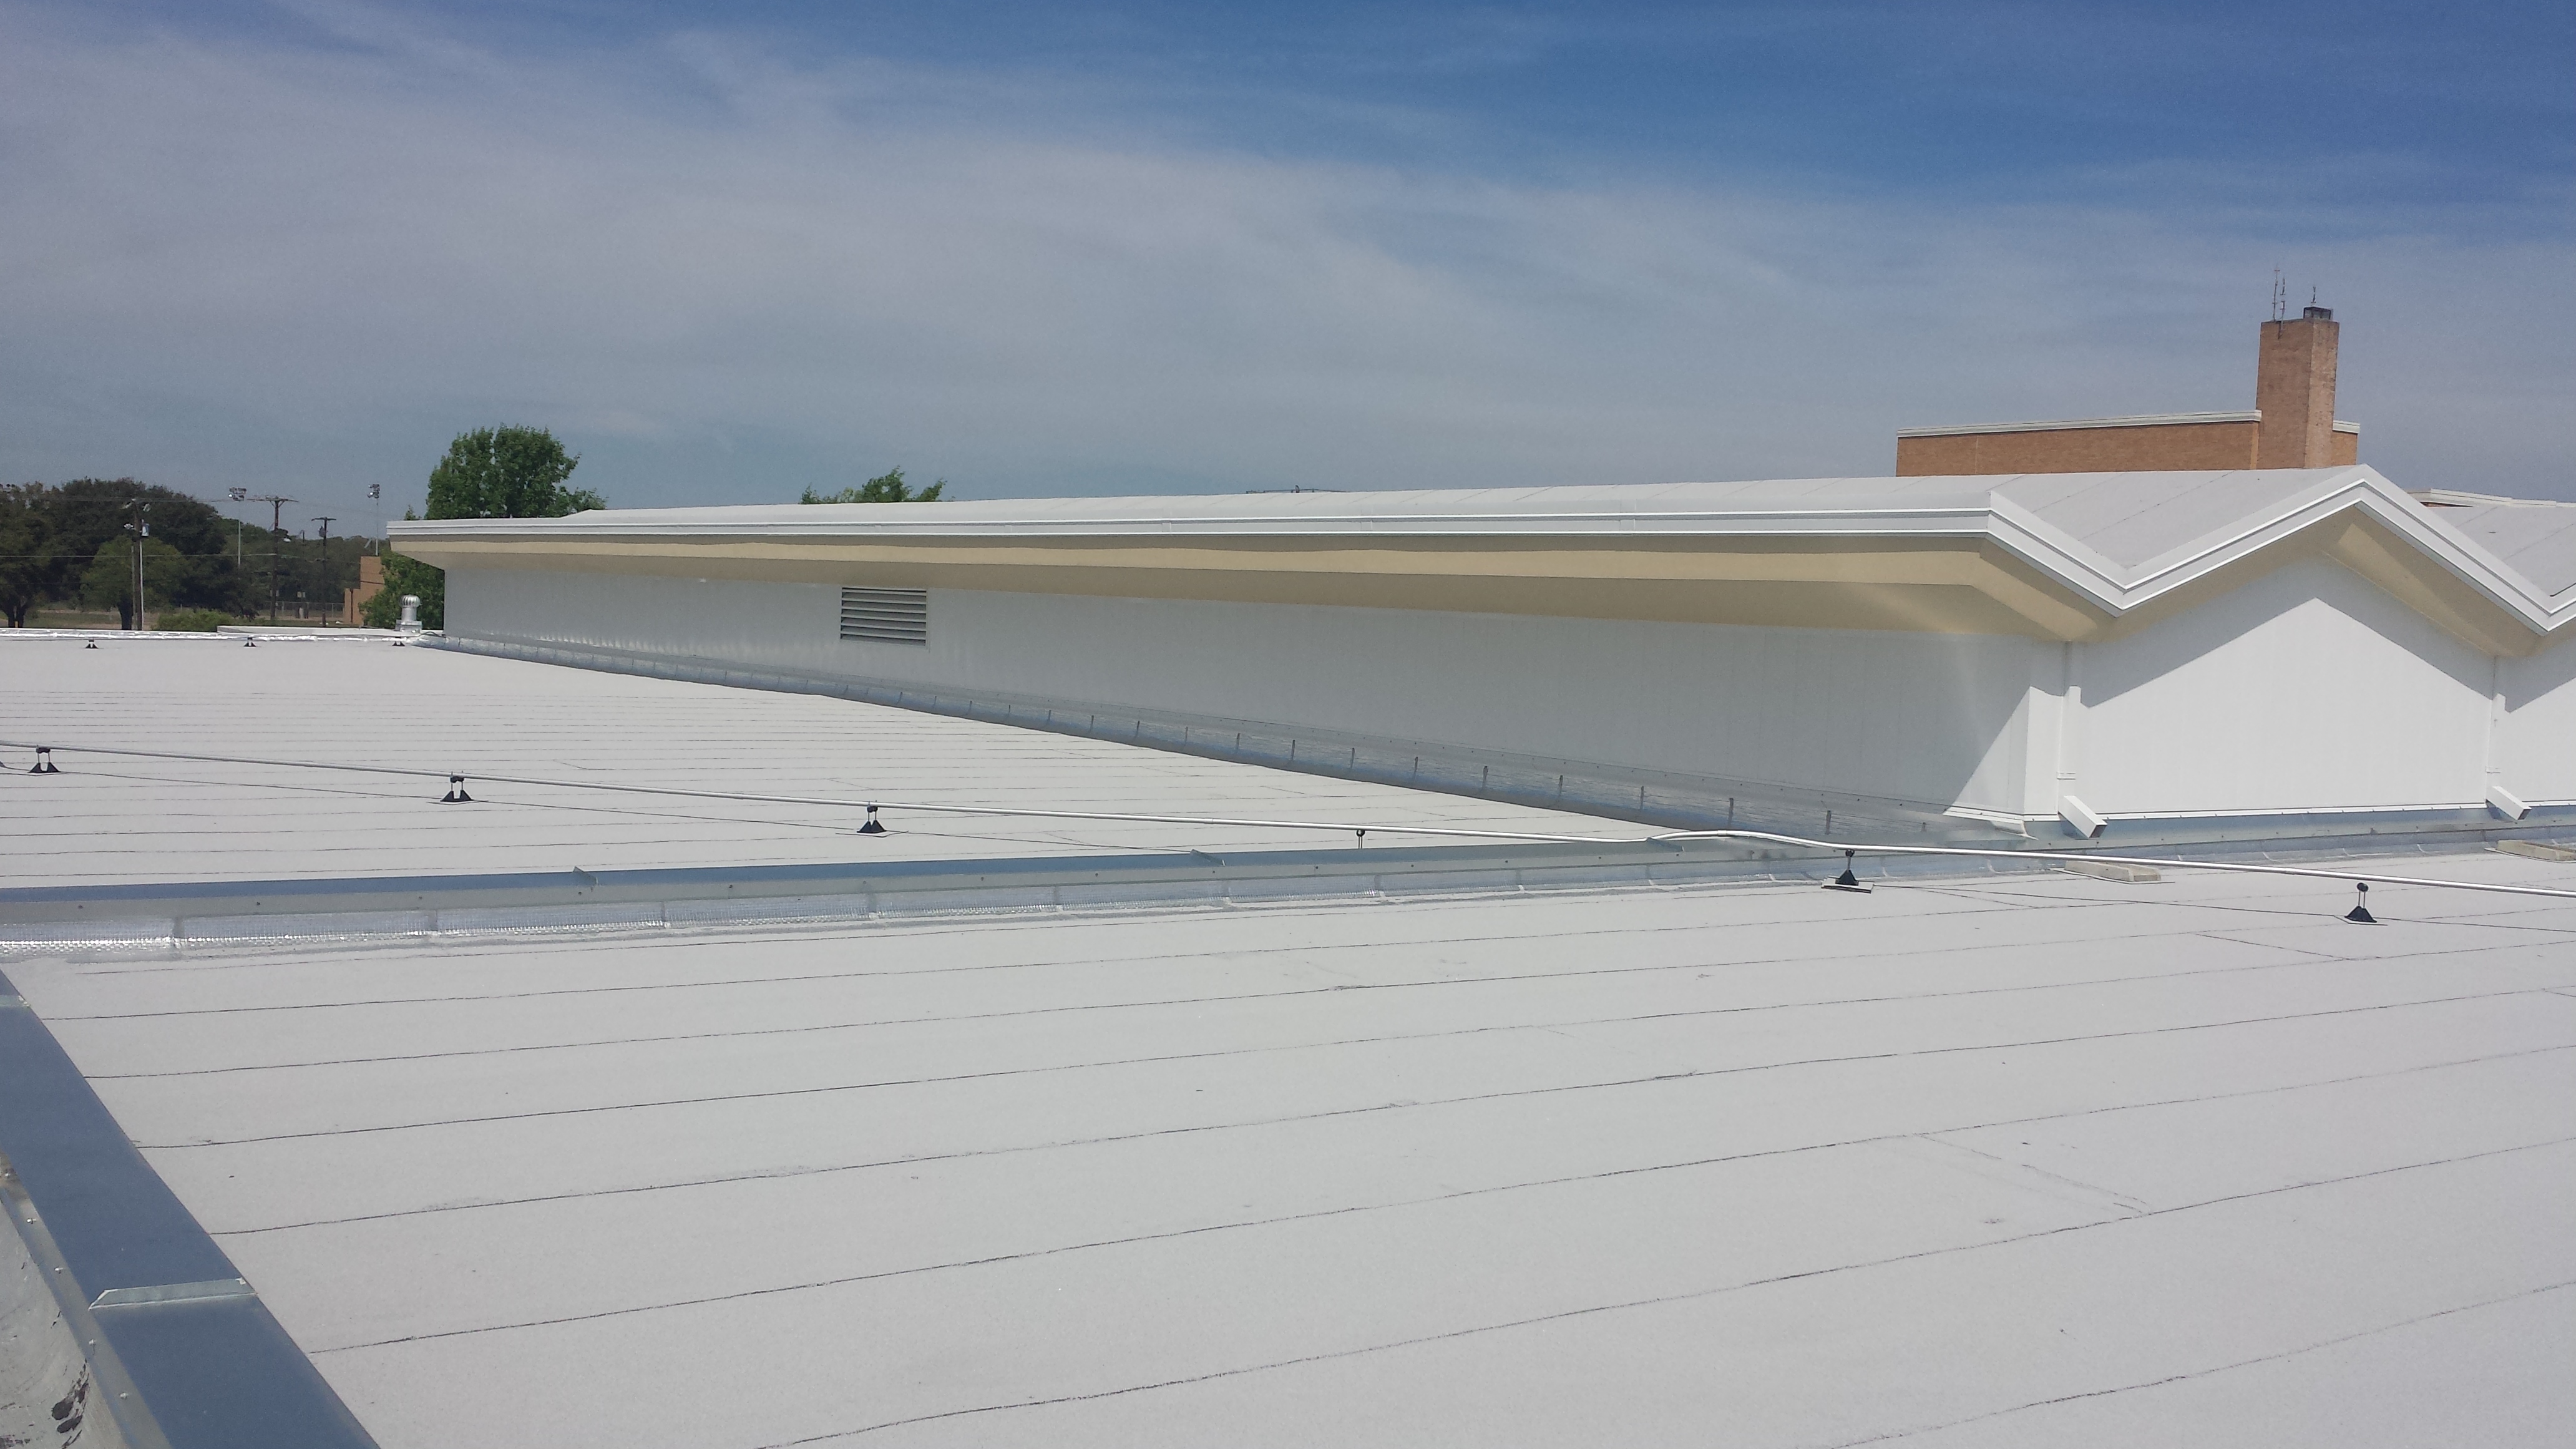 Sbs Roofing System & This Edmonton Roof Picture Shows A Completed 1 Ply Of 15lb Perforated Felt